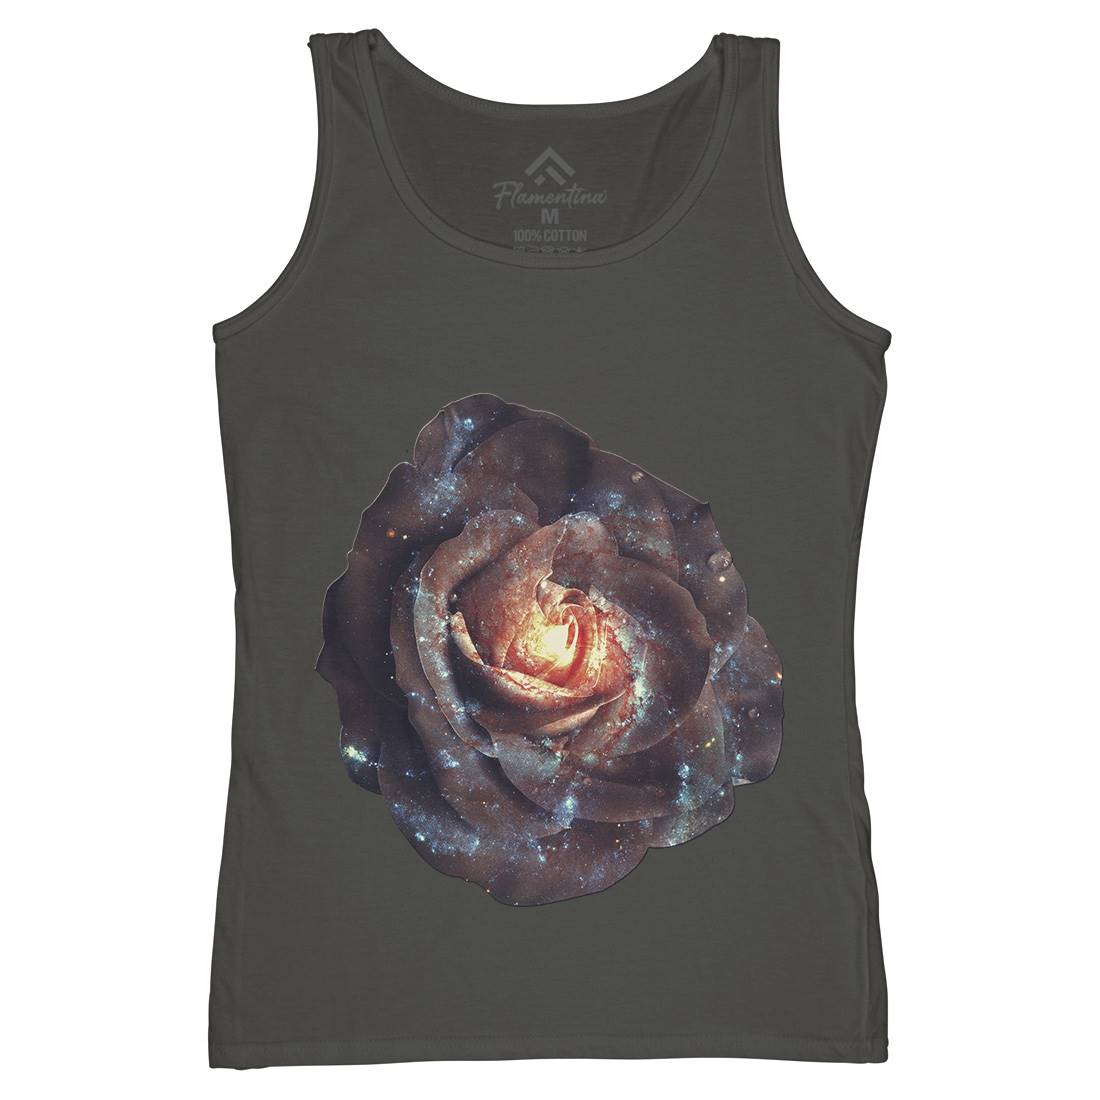 Galactic Rose Womens Organic Tank Top Vest Space A840